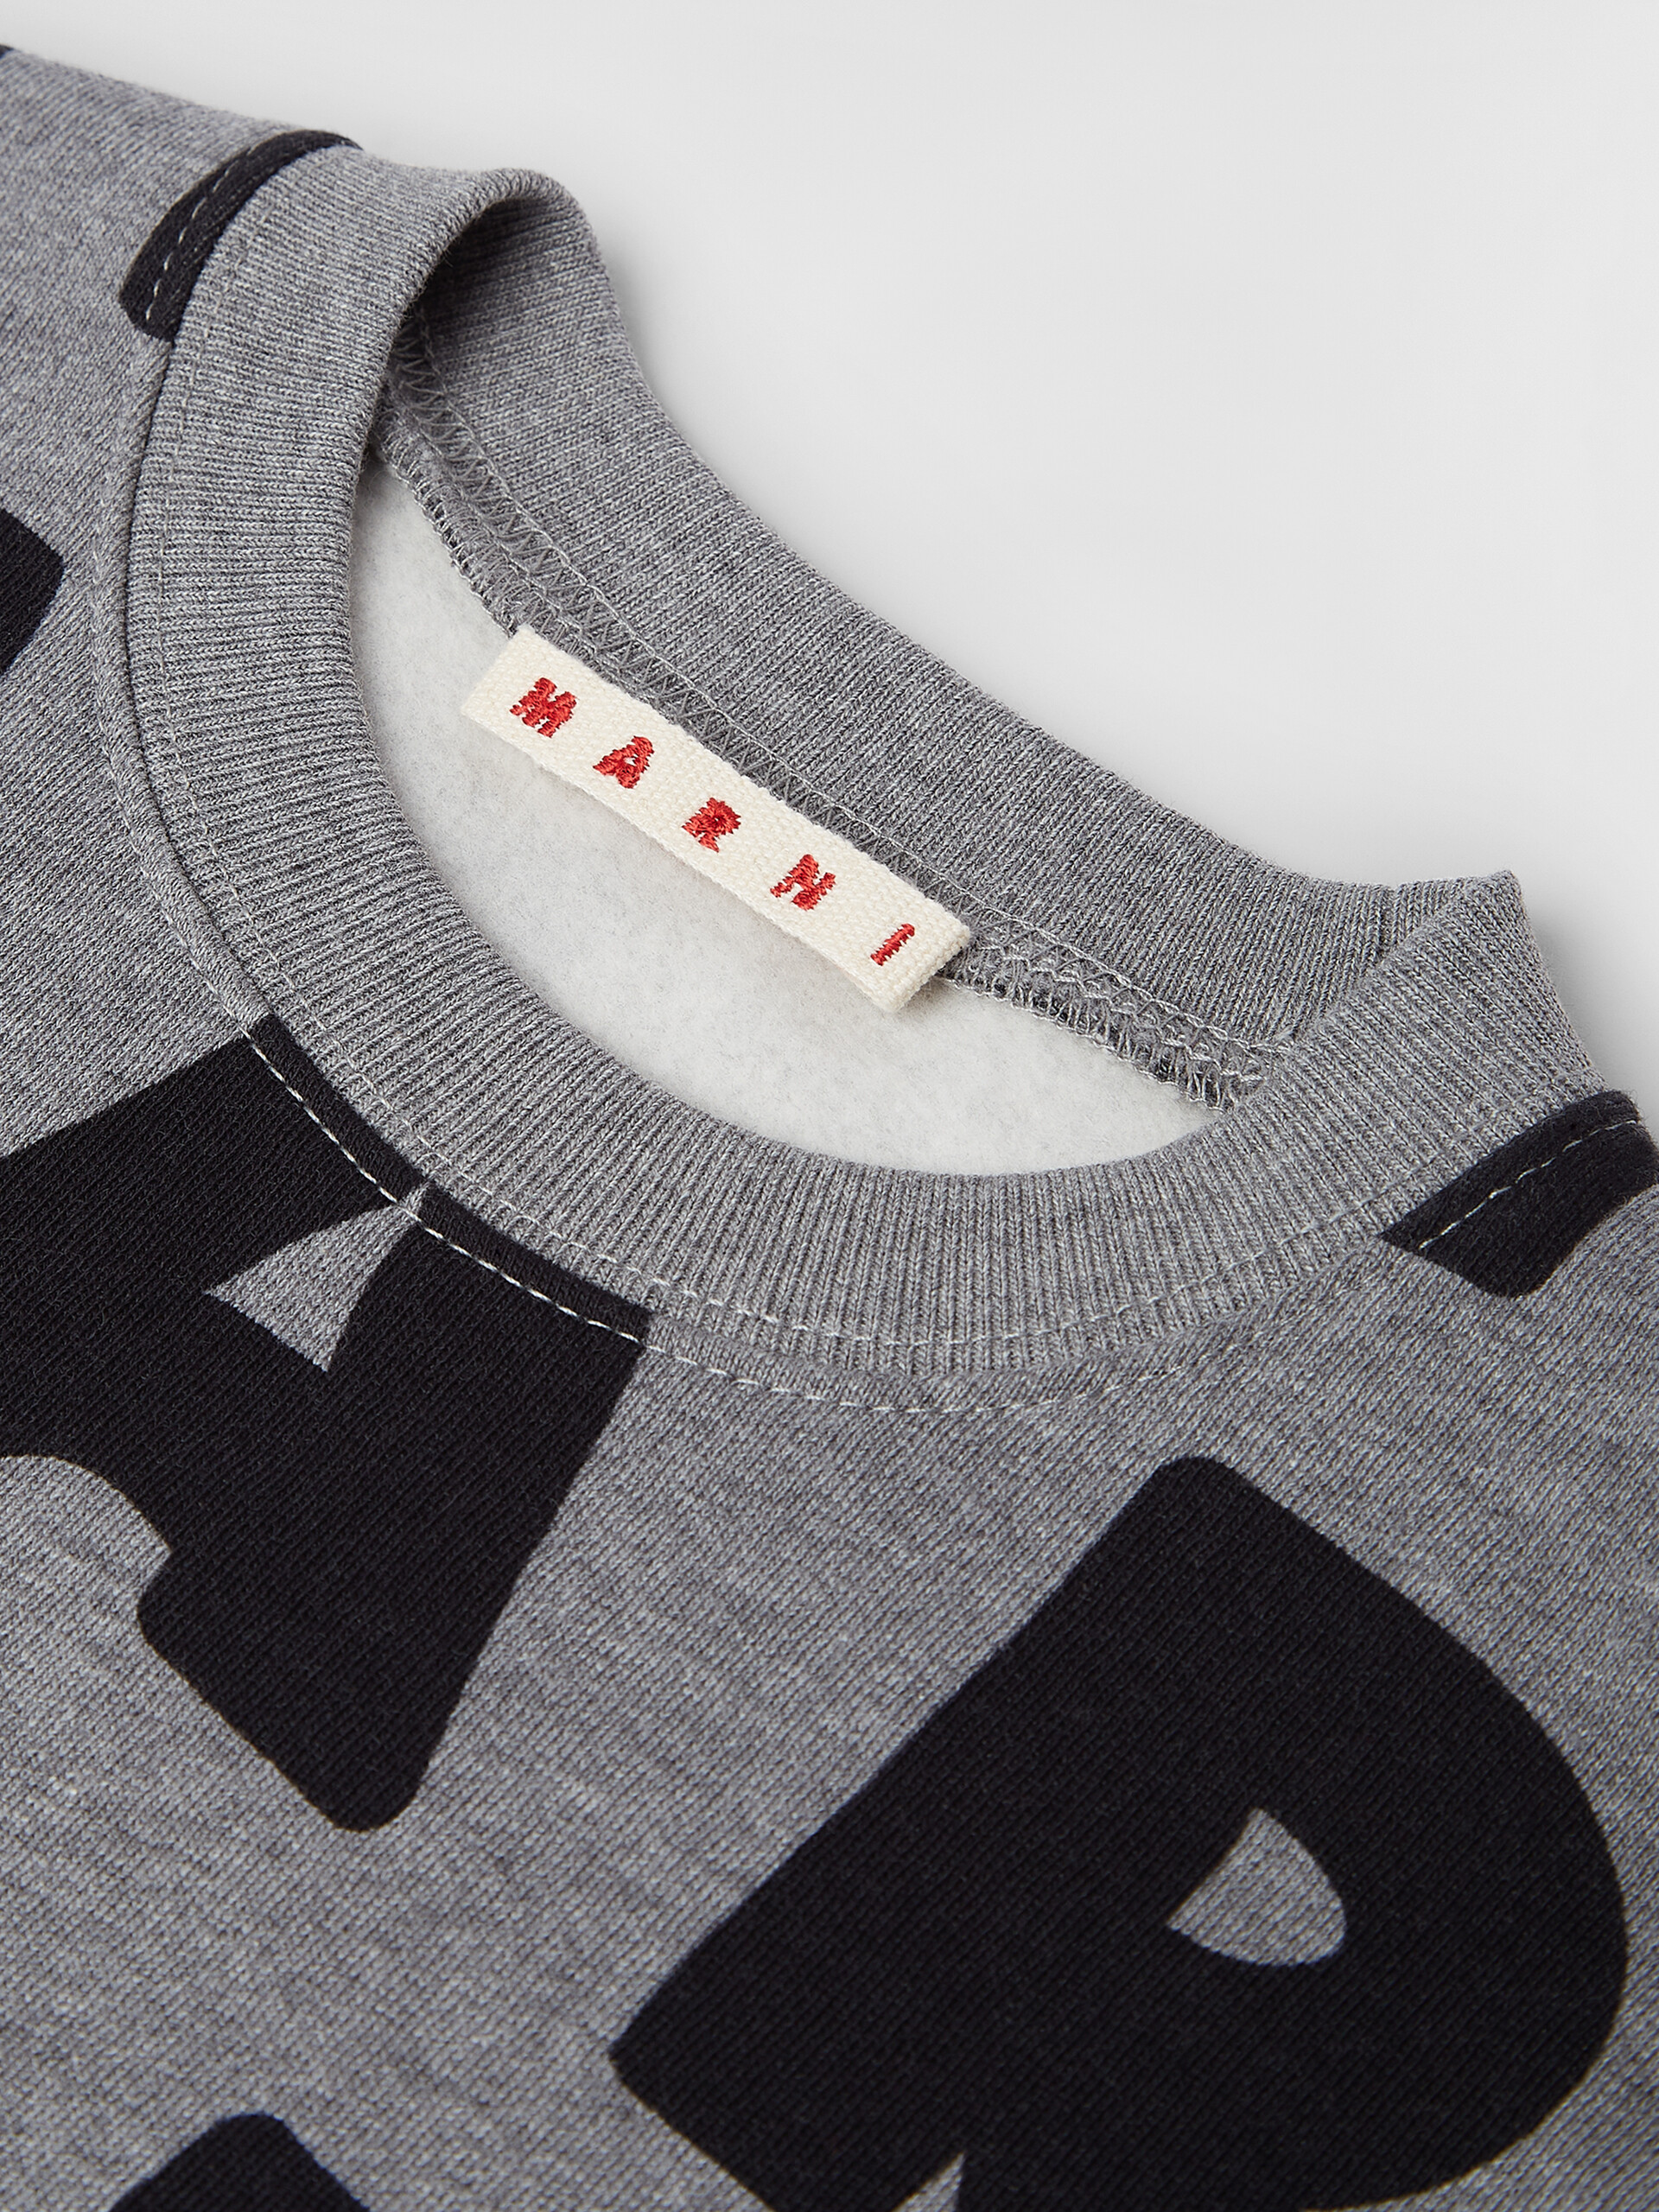 SWEATSHIRT WITH ALLOVER MAXI LOGO PRINT - Sweaters - Image 3